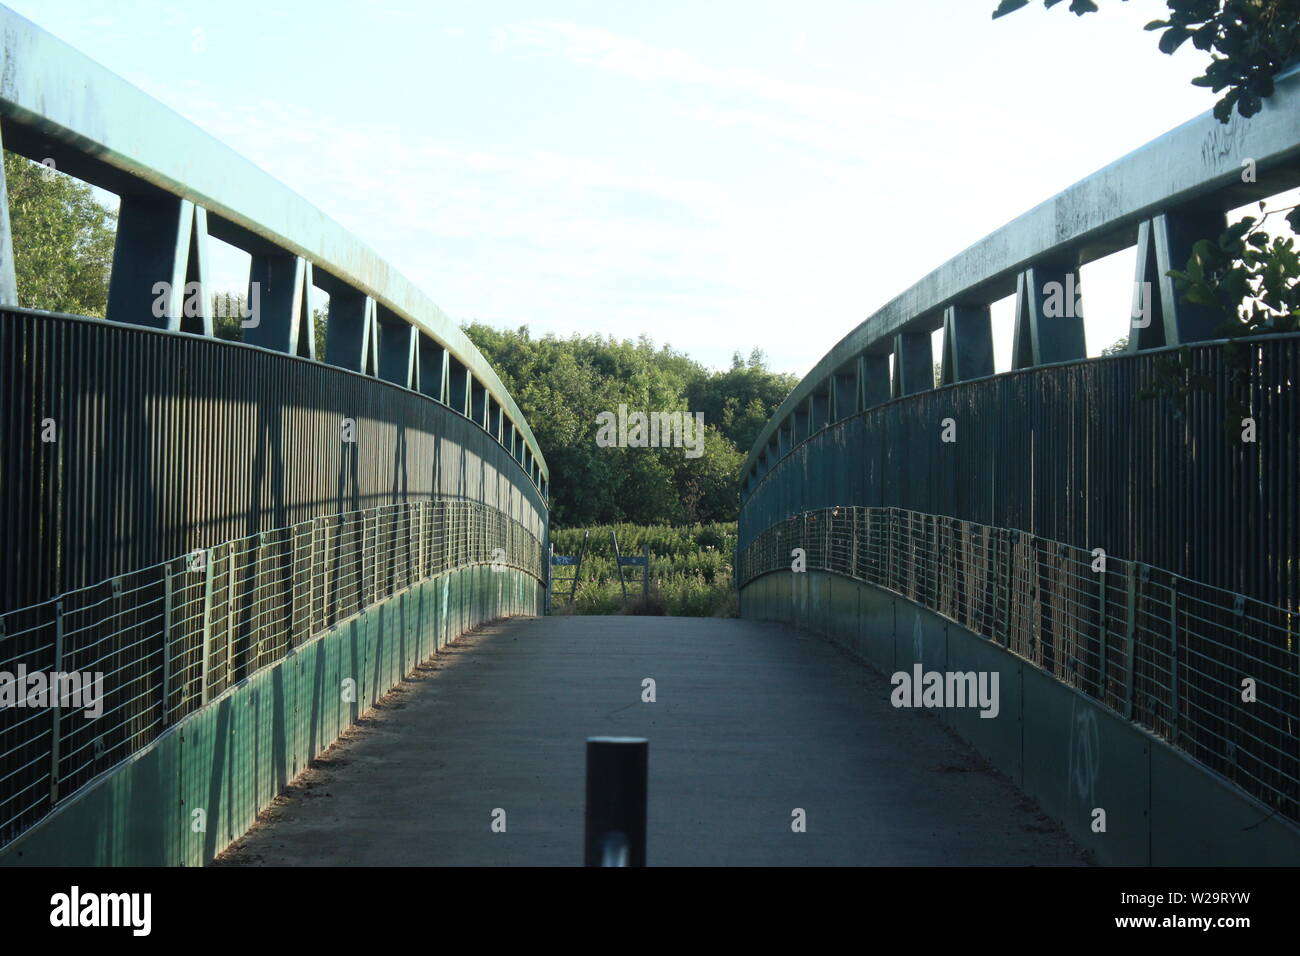 Image of green walkway bridge with bushes and trees in the distance over a lake on a sunny, clear day Stock Photo